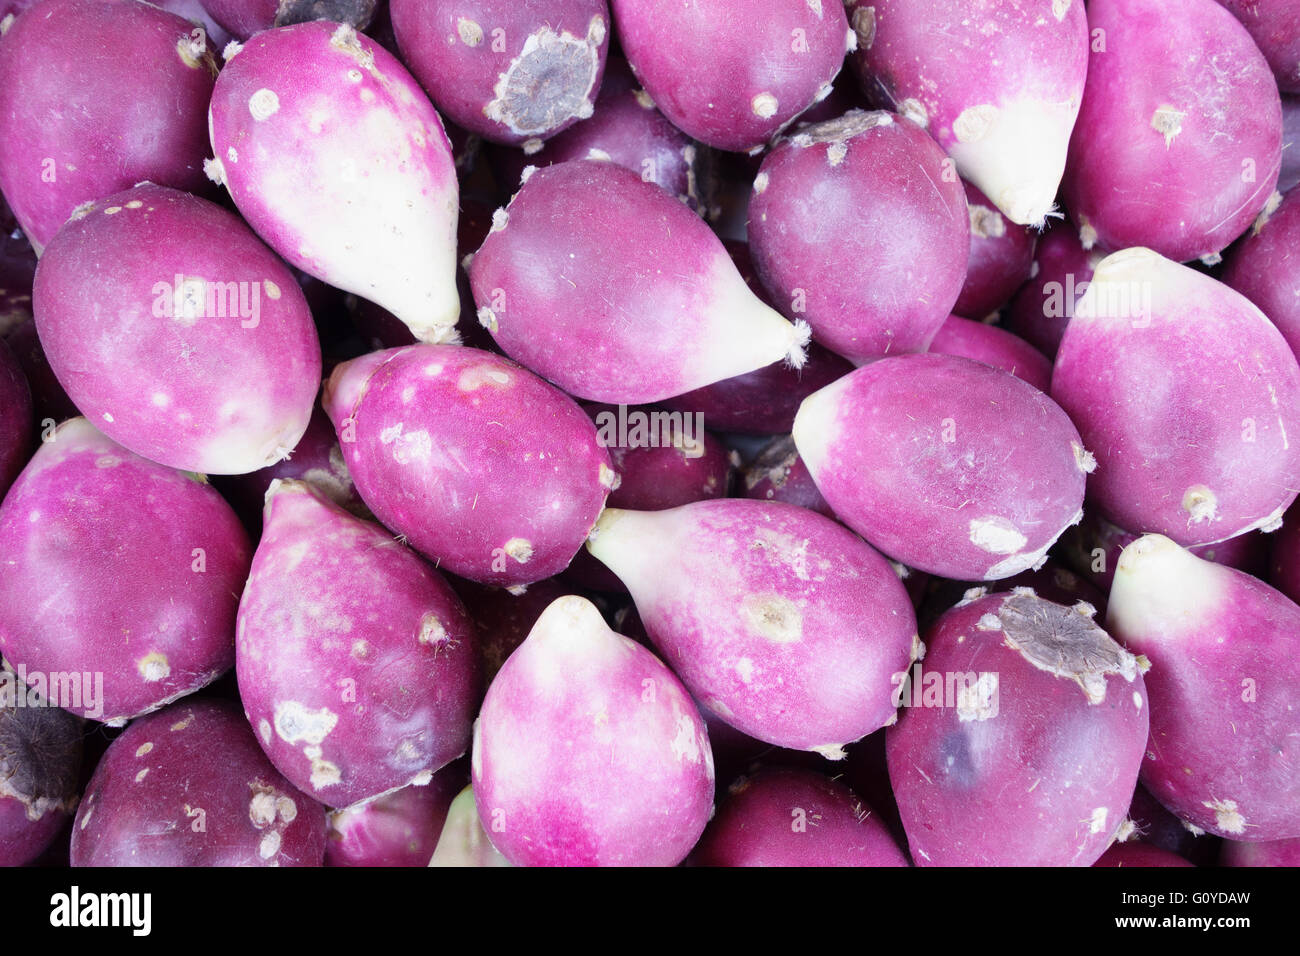 Prickly pear cactus, Opuntia, Opuntia cochenillifera, Beauty in Nature, Cactus, Cochineal Nopal Cactus, Colour, Creative, Desert plant, Edible, Evergreen, Spring Flowering, Summer Flowering, Frost tender, Fruit, Summer Fruiting, Growing, Indian Fig, Mexico indigenous, Nochtli, Nopal, Opuntia, Outdoor, Plant, Smooth Prickly Pear, Tuna Blanca, Wild flower, Purple, Stock Photo